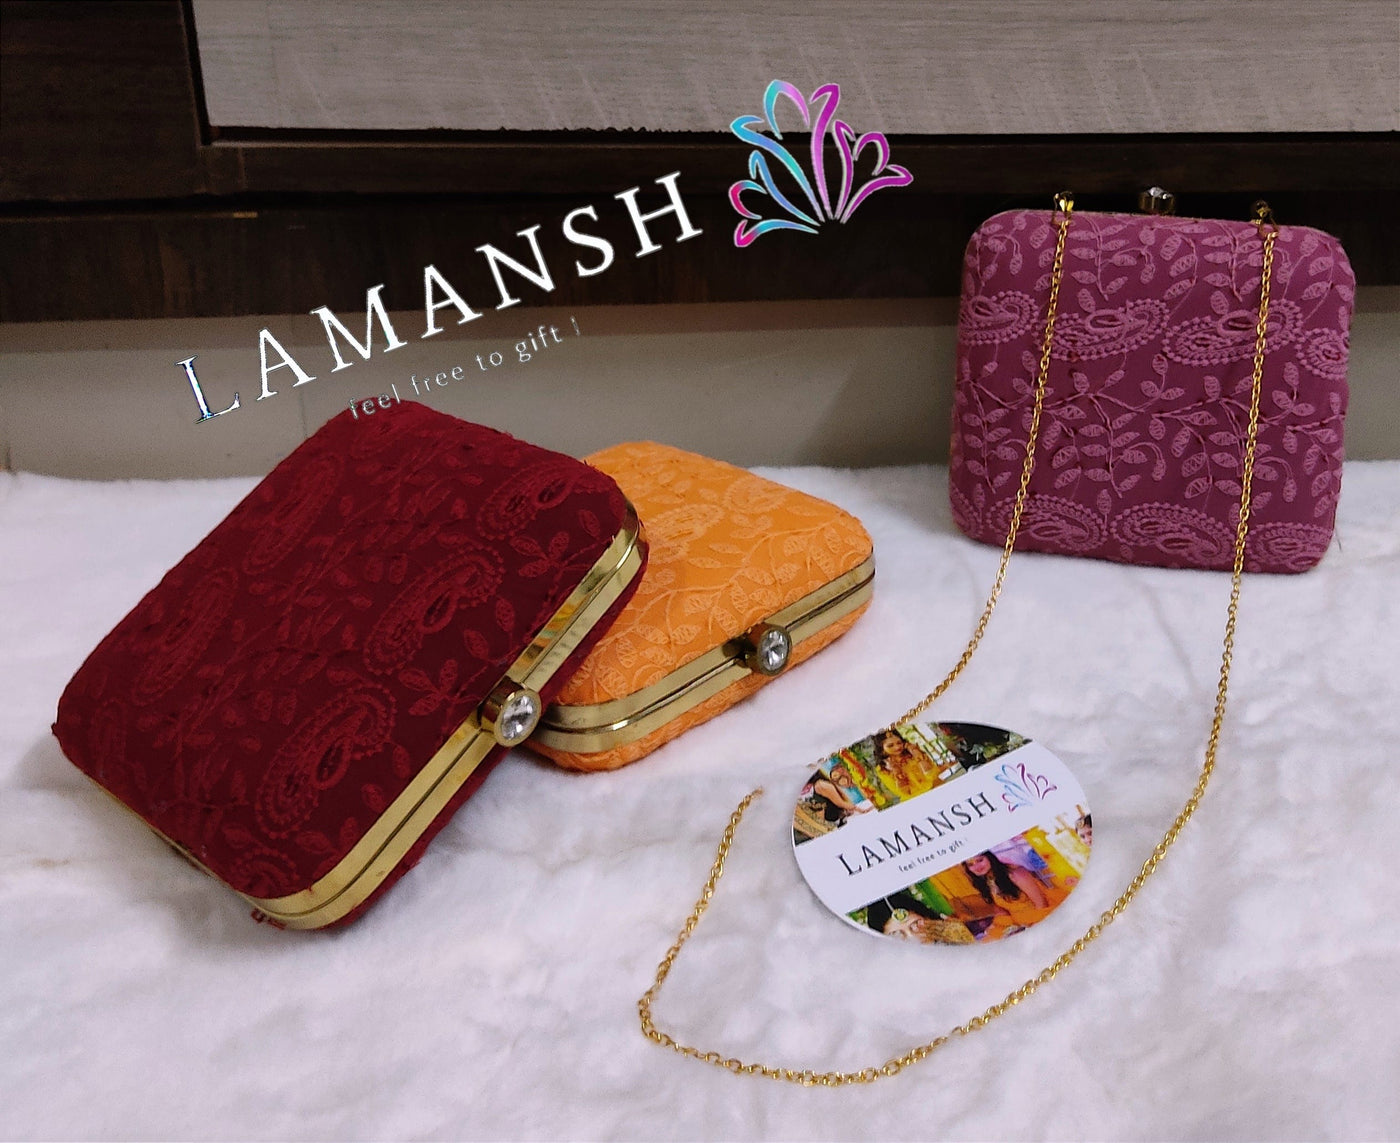 290 Rs each on Purchasing in bulk 📱at 8619550223 metal clutch LAMANSH® Chikankari work stylish Metal 👛 Purse Clutch for Wedding & Parties / Gifts 🎁 & Favors for Giveaways